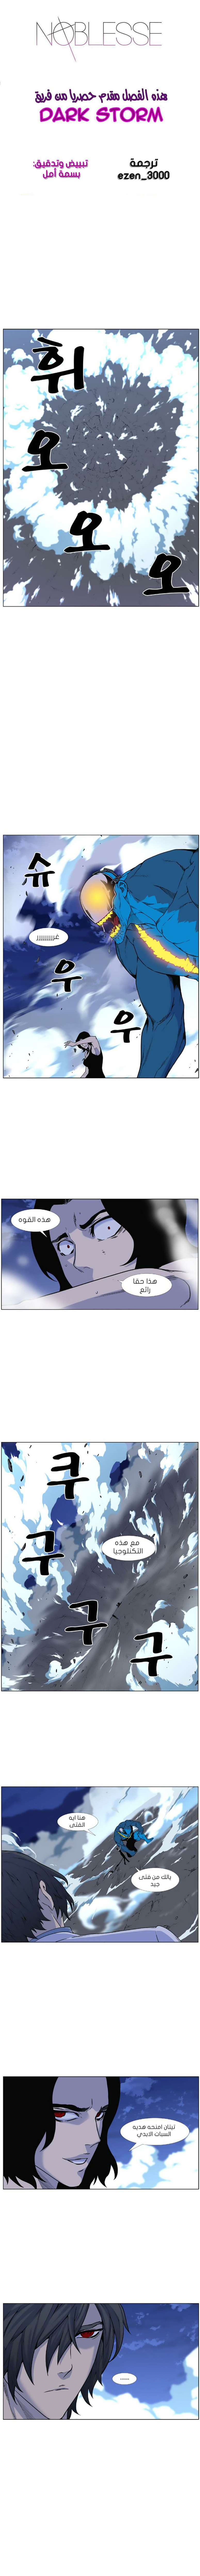 Noblesse: Chapter 444 - Page 1